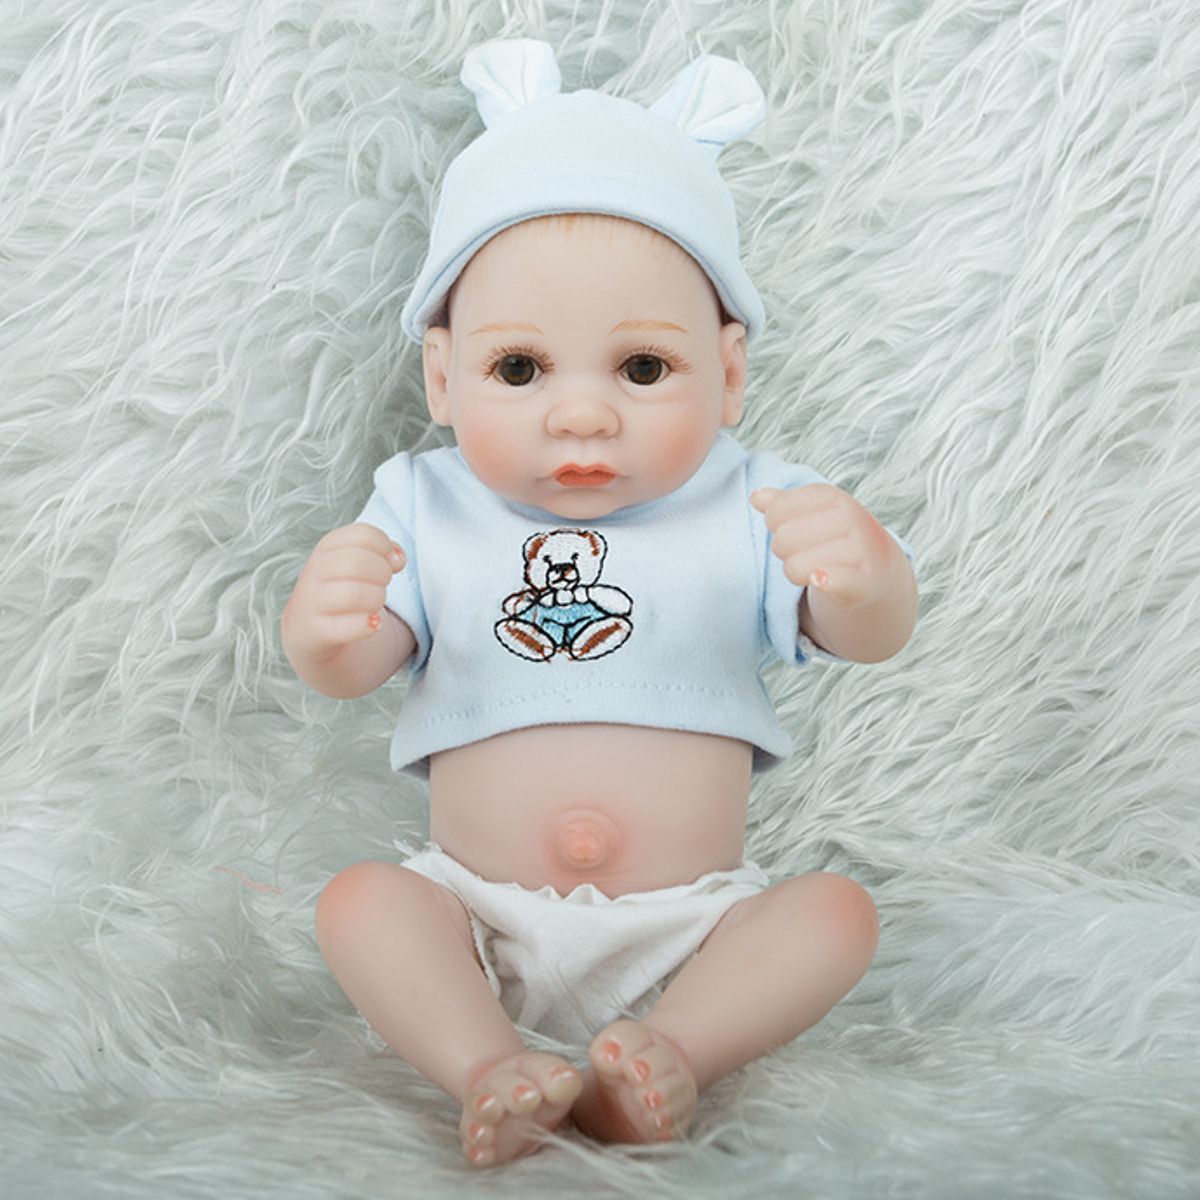 28CM-Silicone-Realistic-Sleeping-Reborns-Lifelike-Newborn-Baby-Doll-Toy-with-Moveable-Head-Arms-And--1817558-4